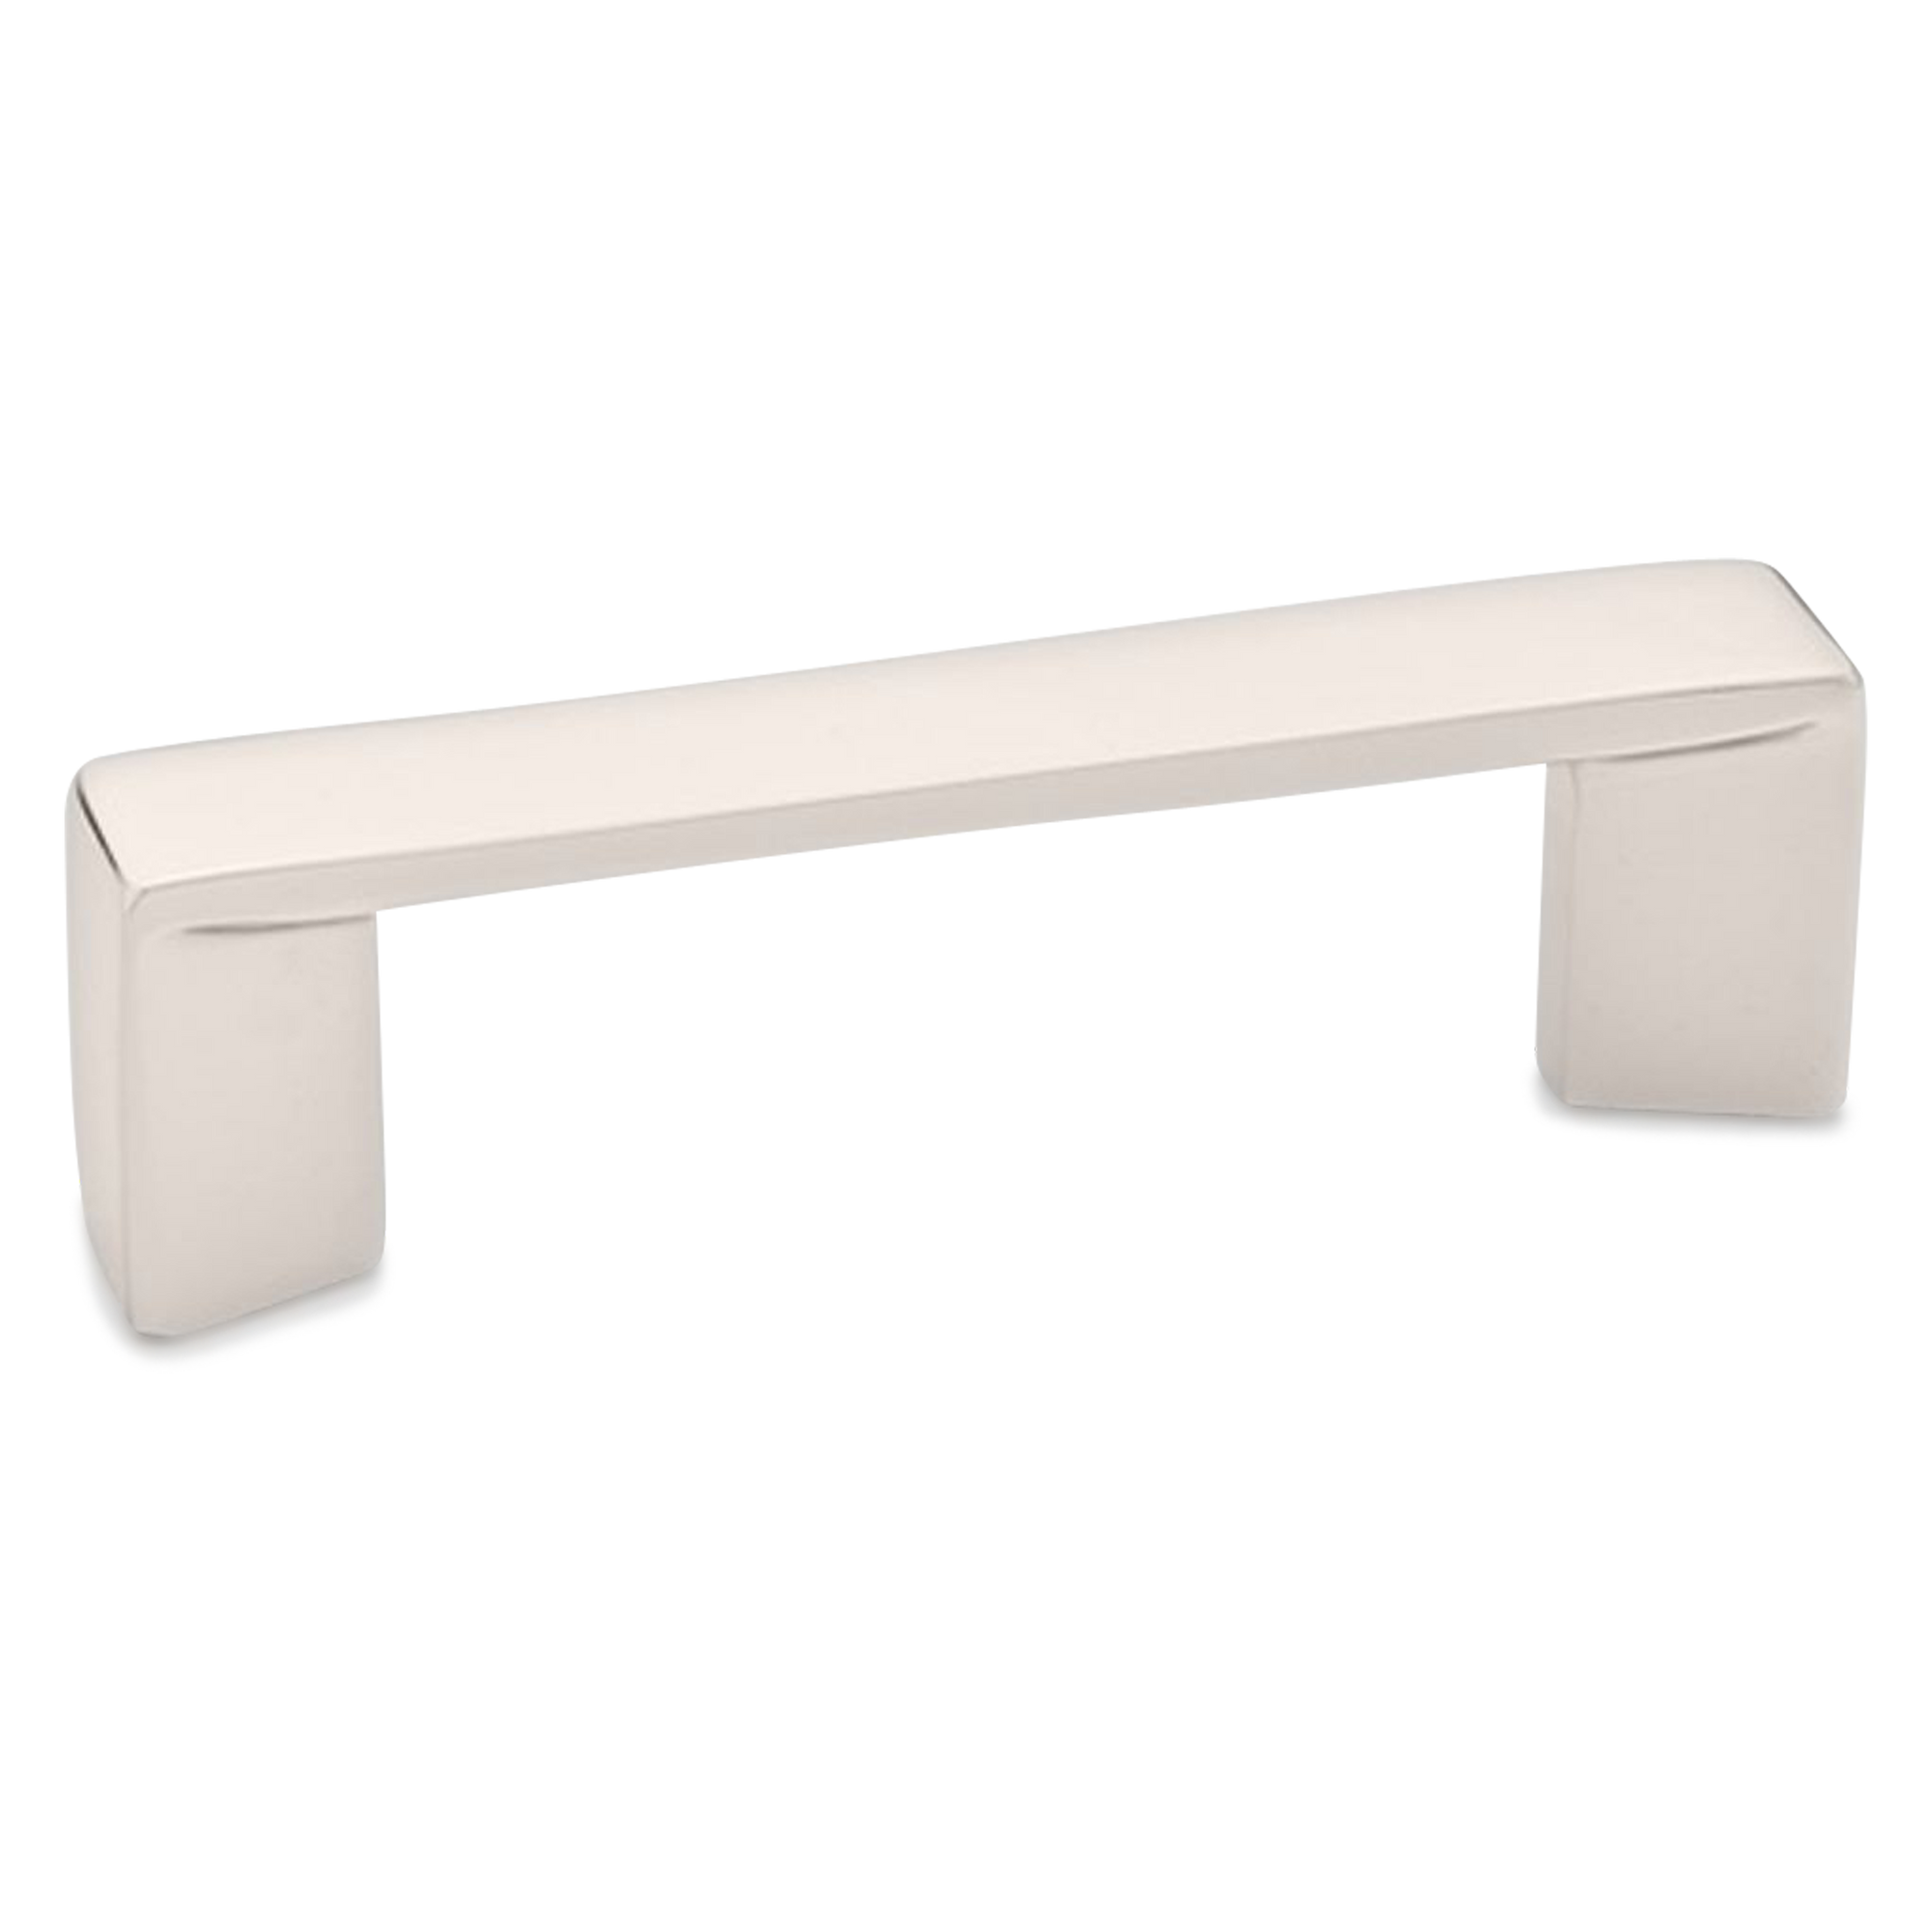 A modern and seamless pull with sleek side handle details.